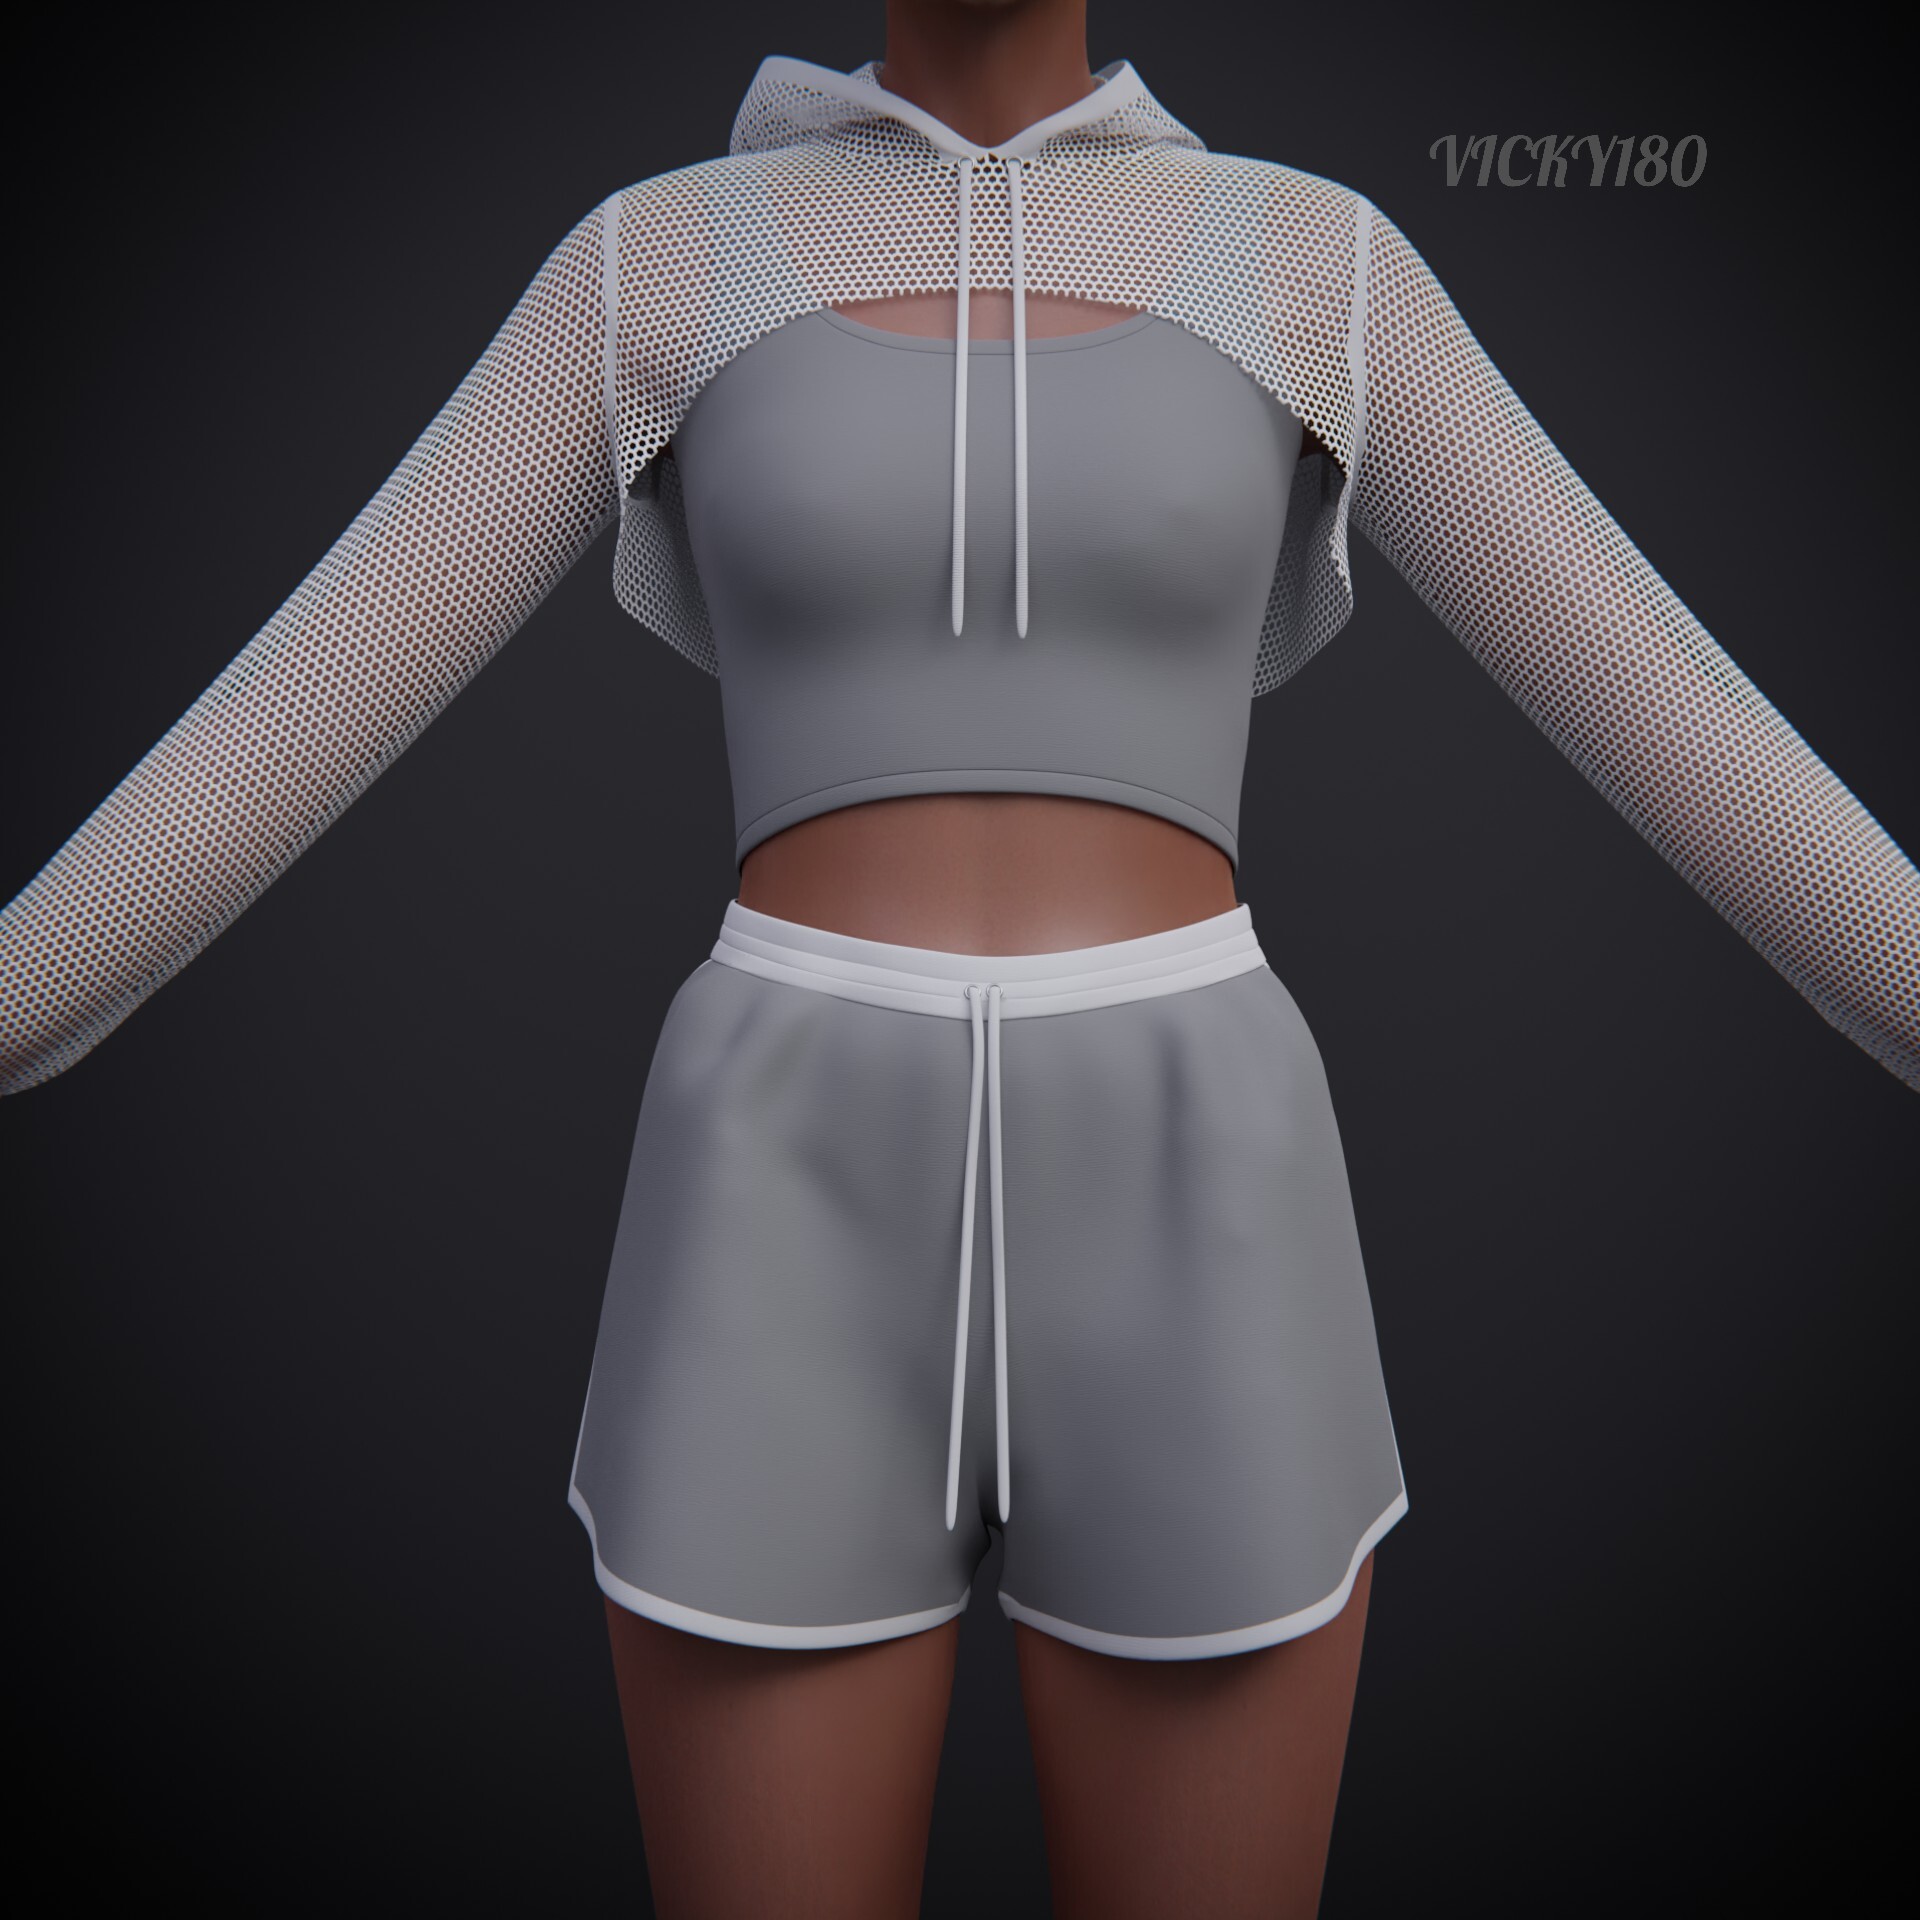 Shorts and Sports Bra Two Piece Workout Outfit With Net Top - 3D Model by  vicky180